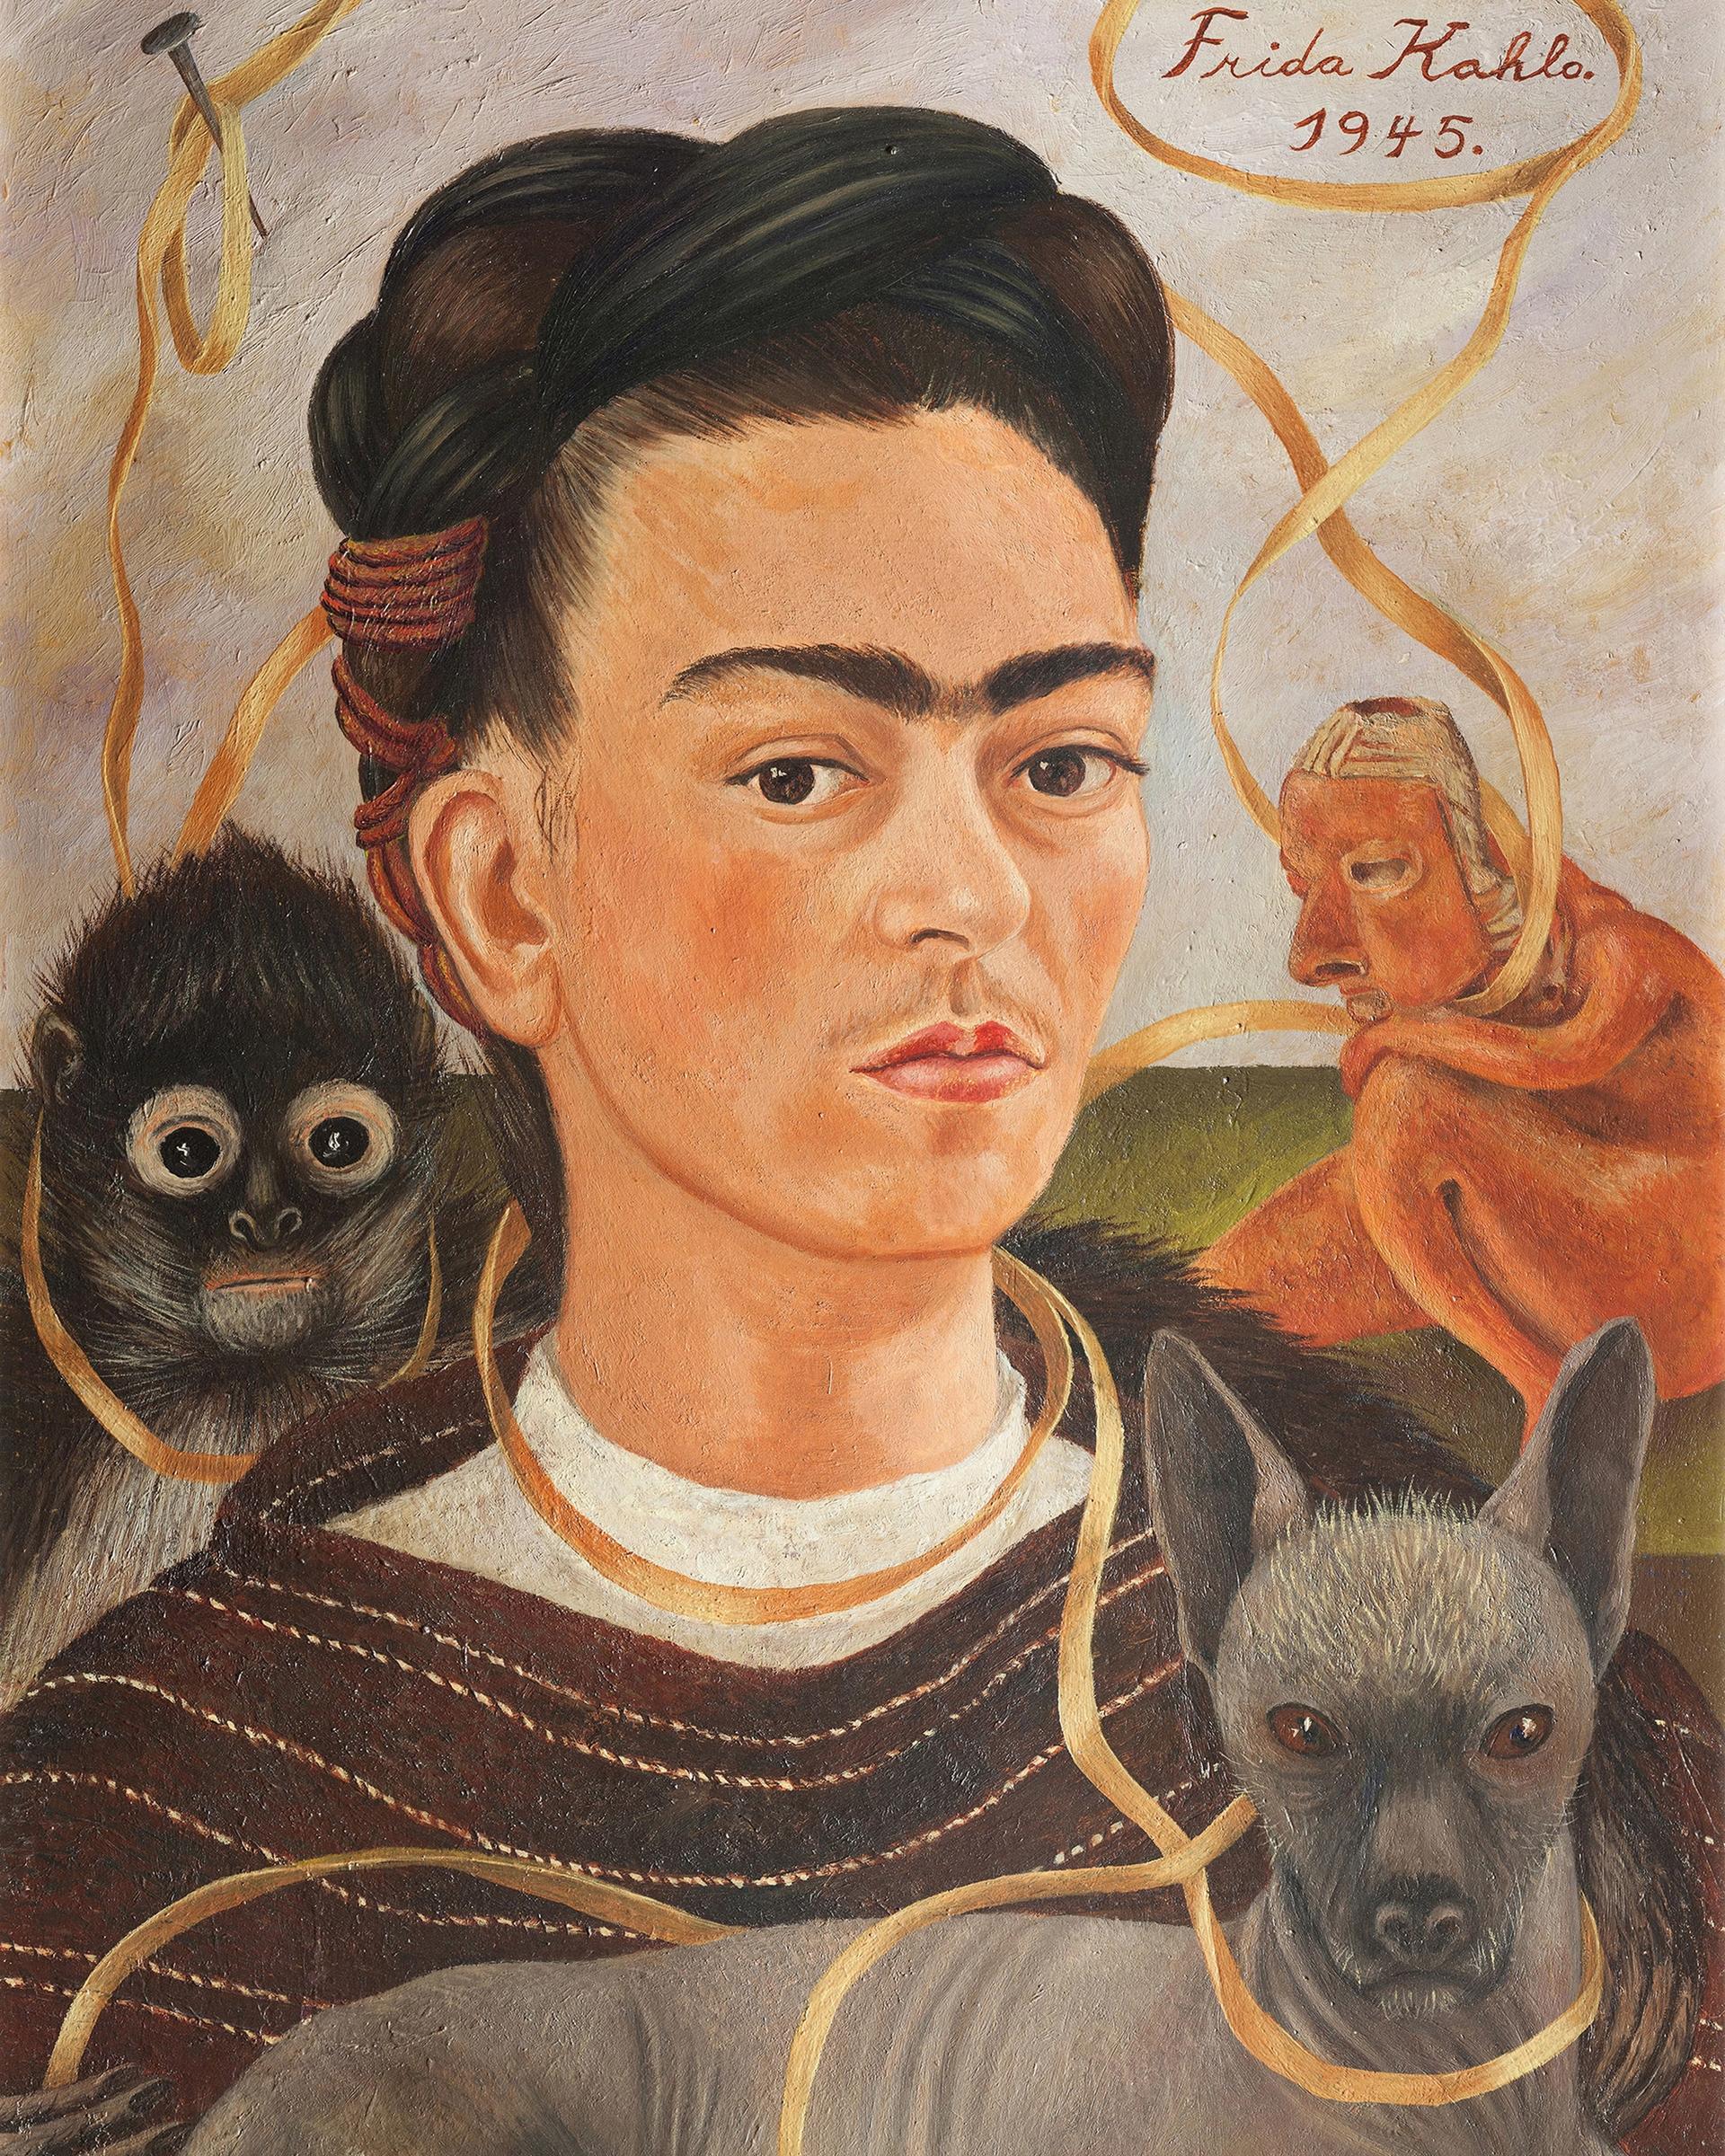 Frida Kahlo, Self-Portrait with Small Monkey (1945) Collection Museo Dolores Olmedo, Xochimilco, Mexico © 2020 Banco de México Diego Rivera Frida Kahlo Museums Trust, Mexico, D.F. / Artists Rights Society (ARS), New York